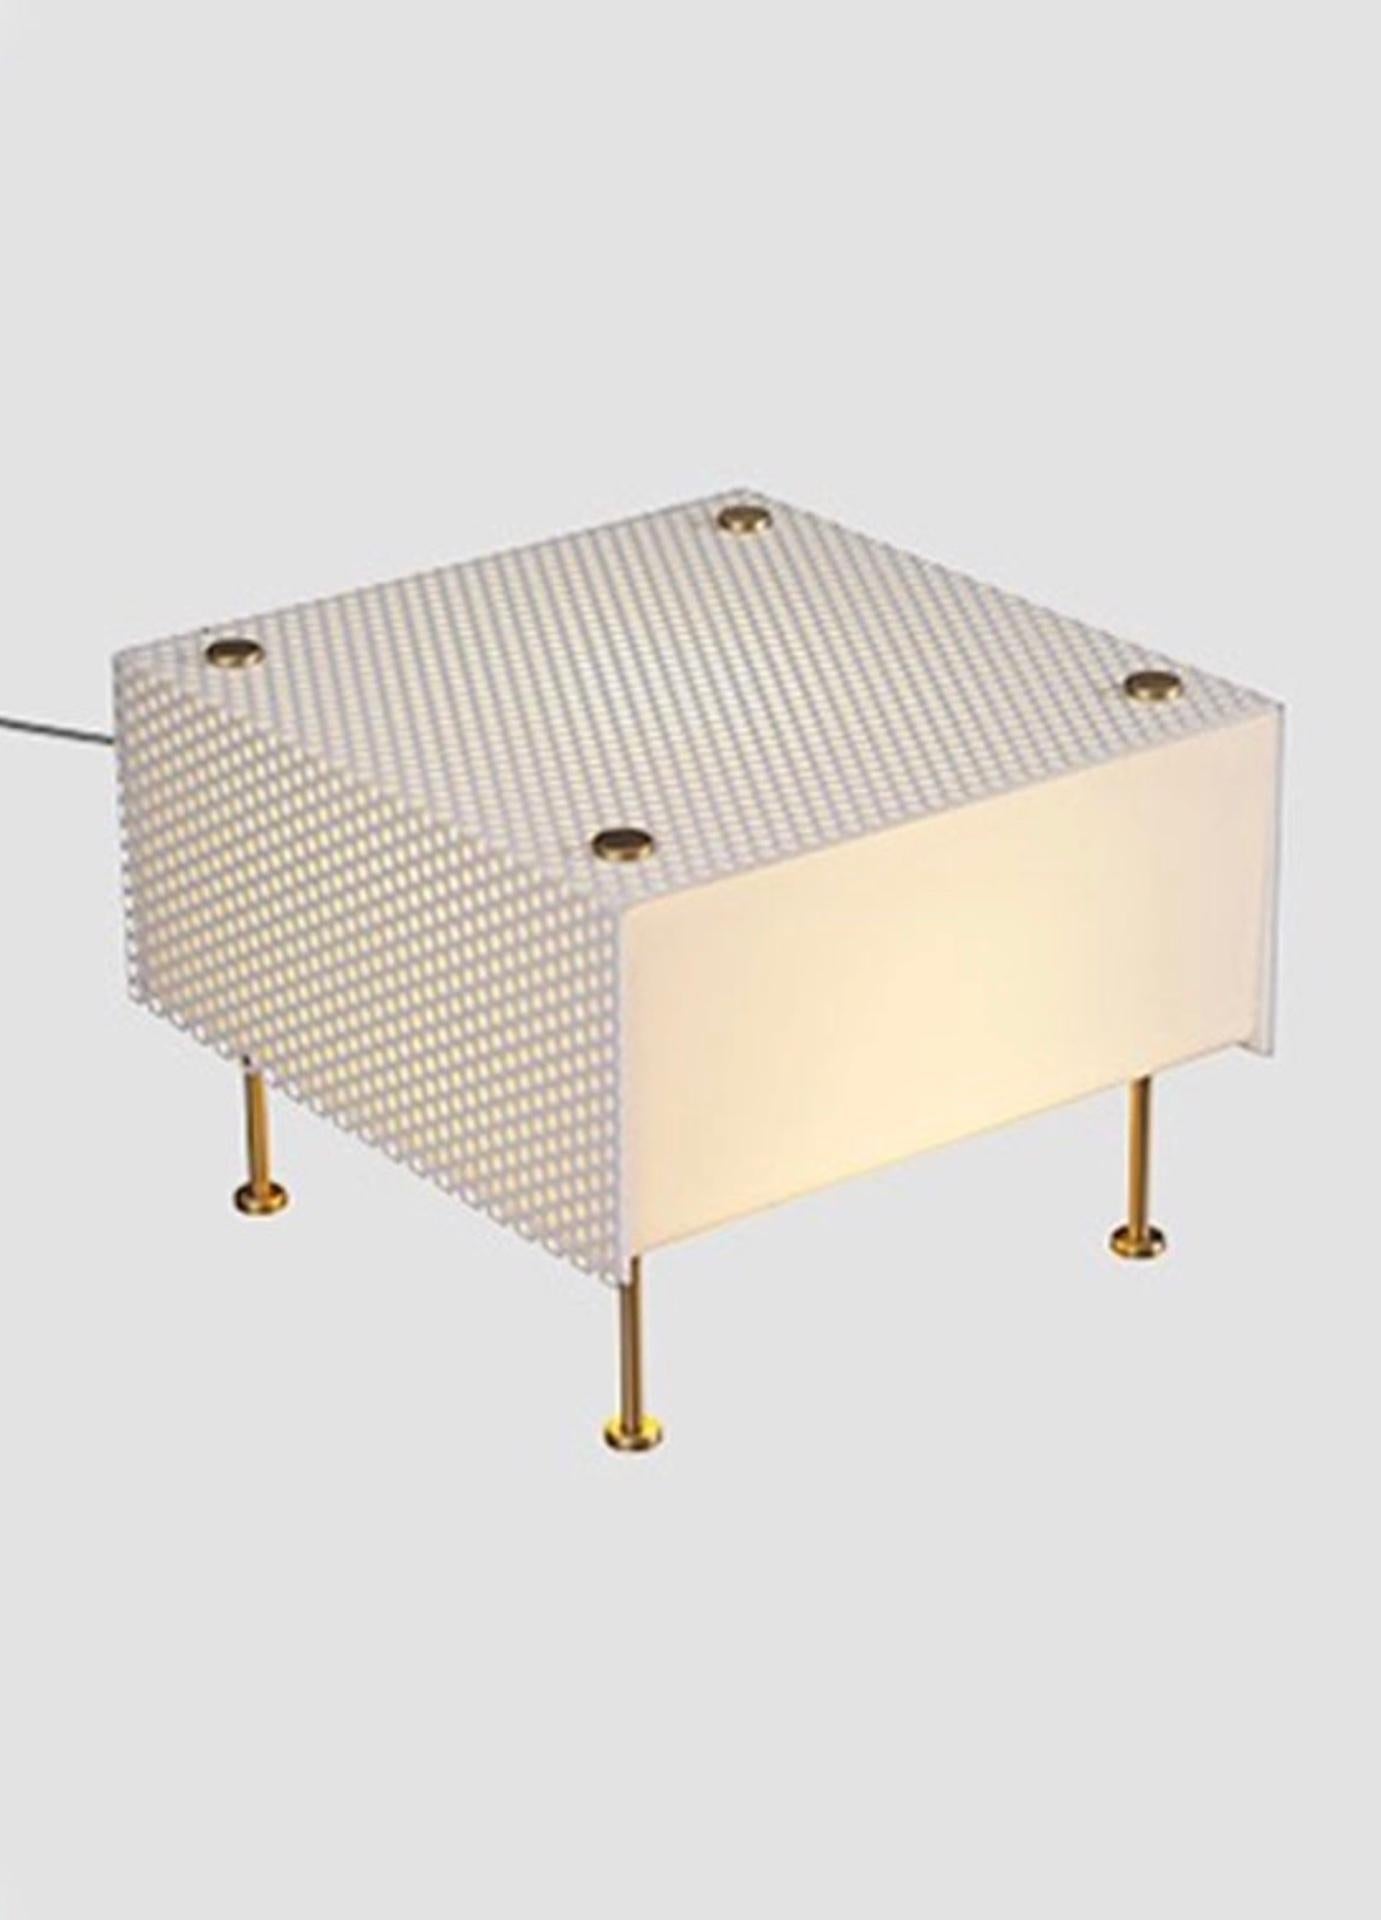 The G61 table lamp brings new life to a bookcase, coffee table or any place of relaxation. This cube of light with its white lacquered perforated sheet metal cover is available in two sizes: Small or Medium. Designed by Pierre Guariche in 1959,